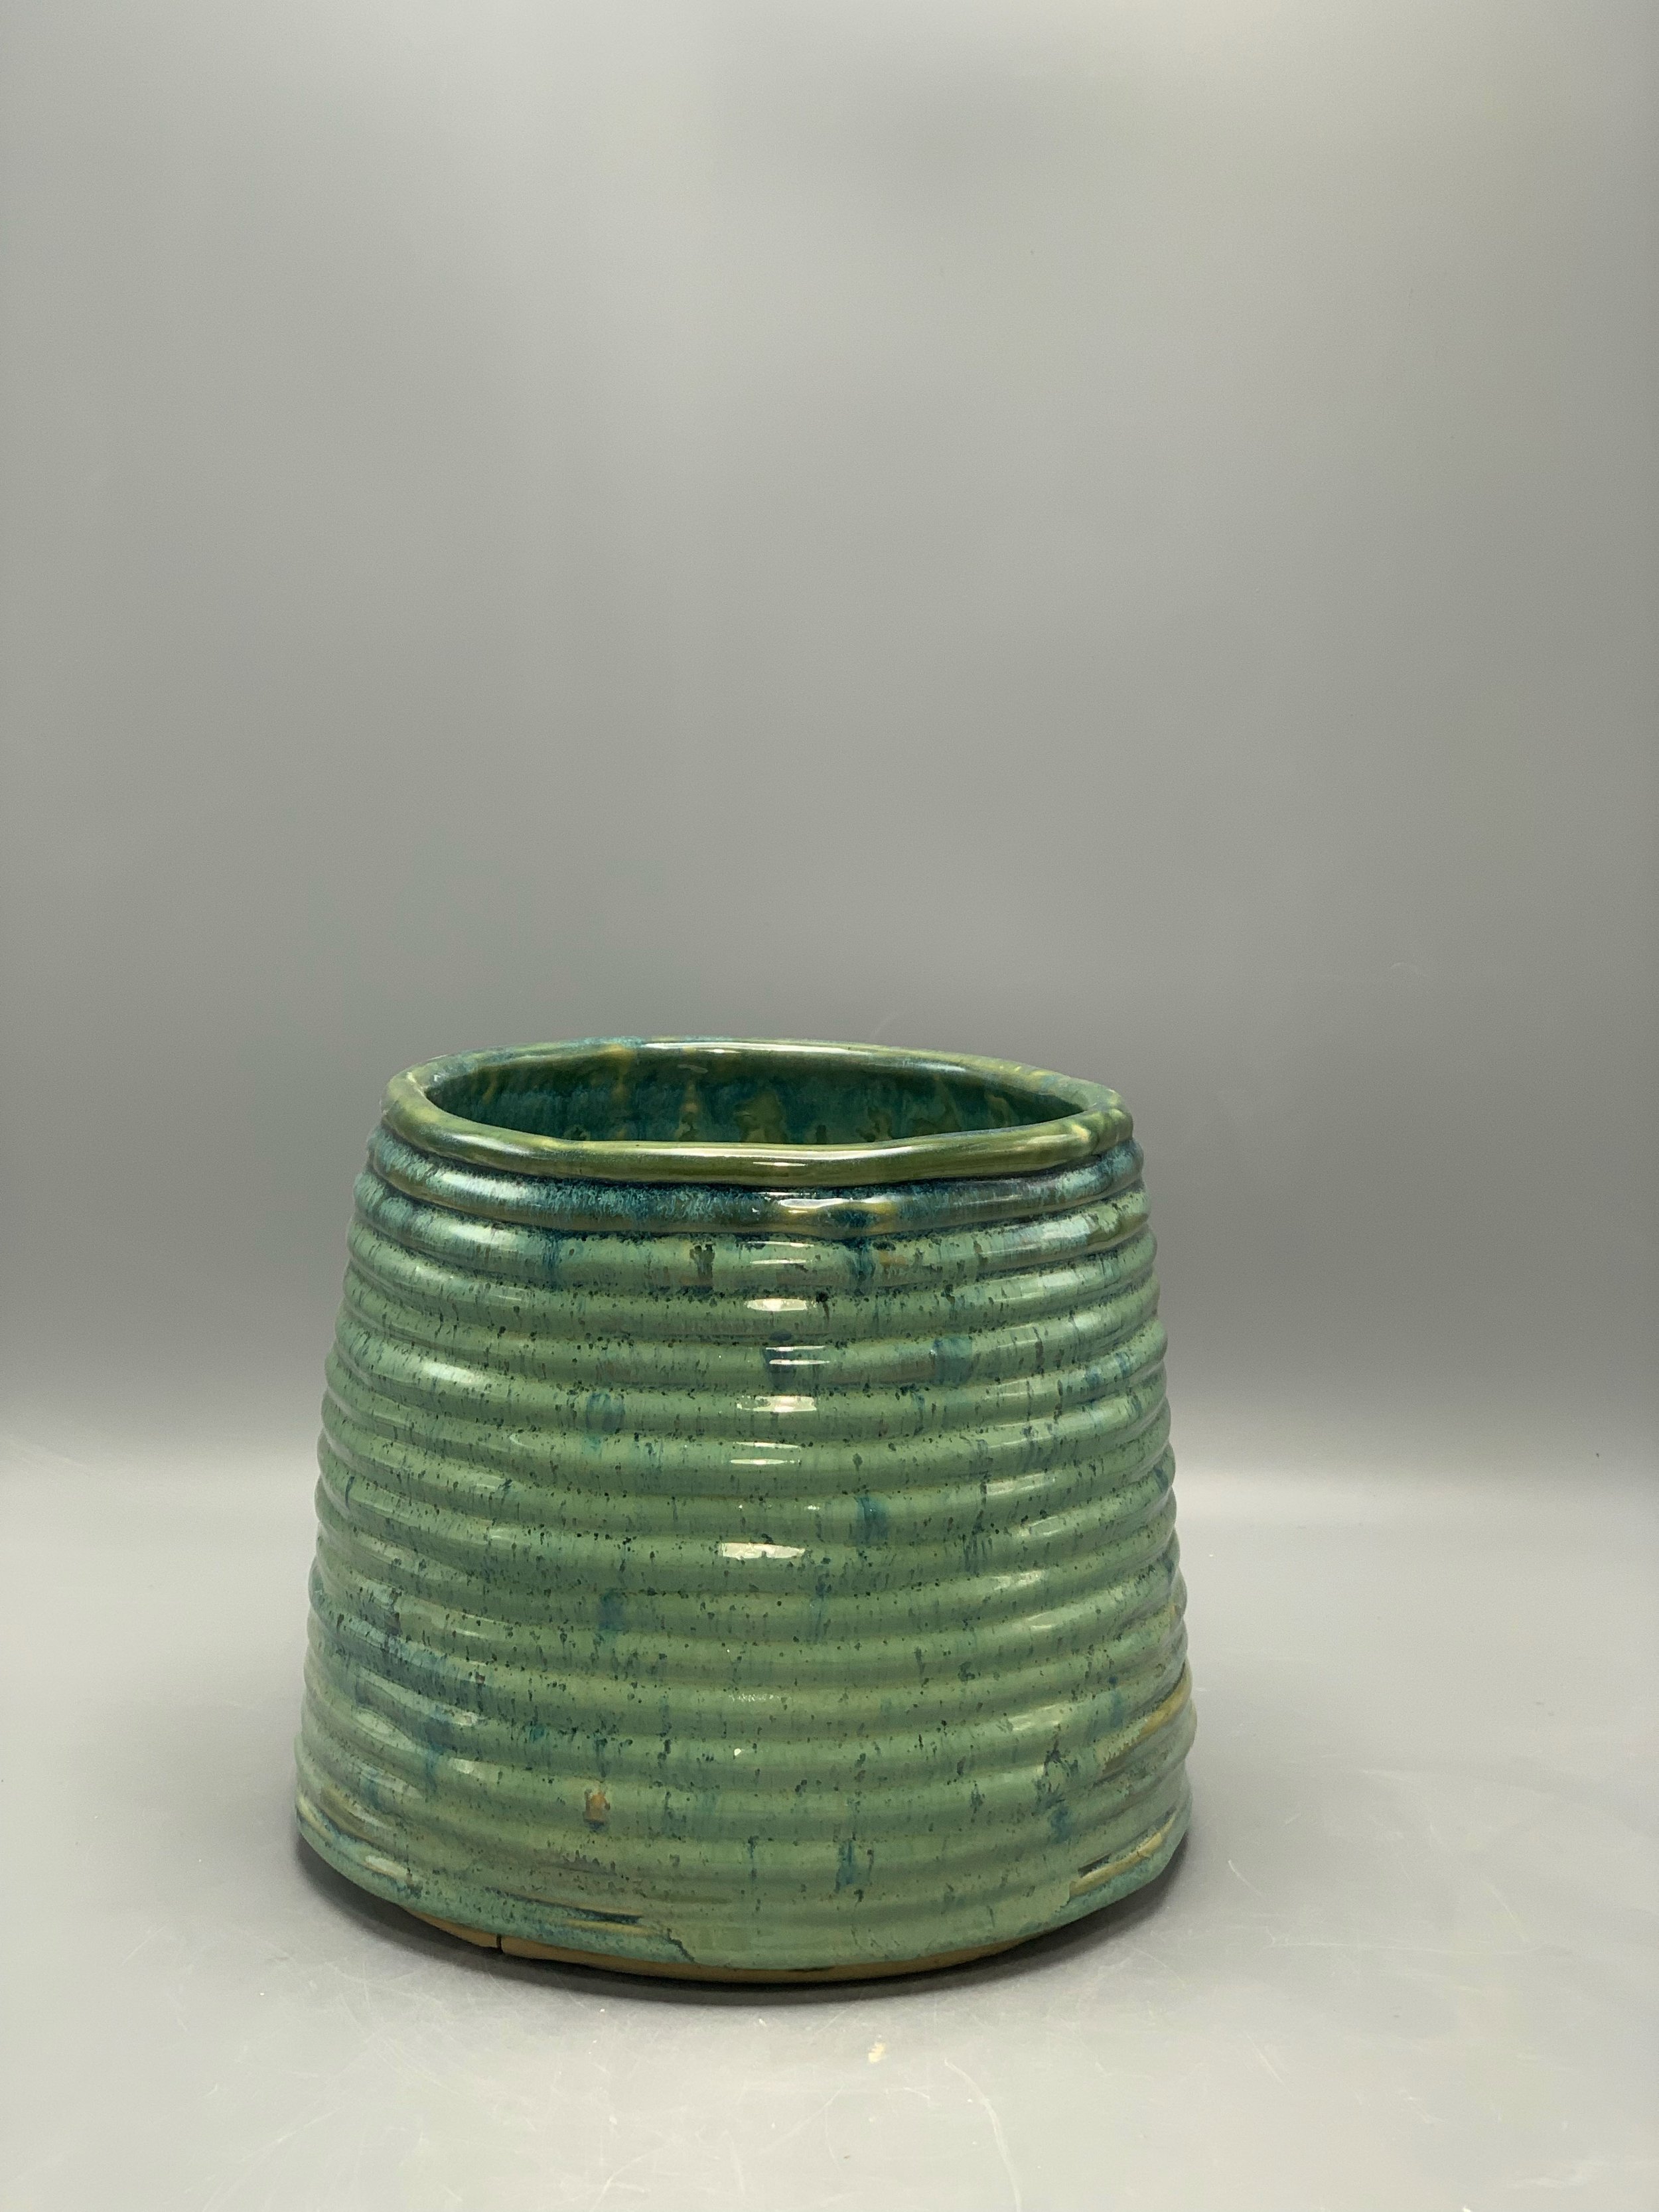 Studio access two months — Green River Pottery